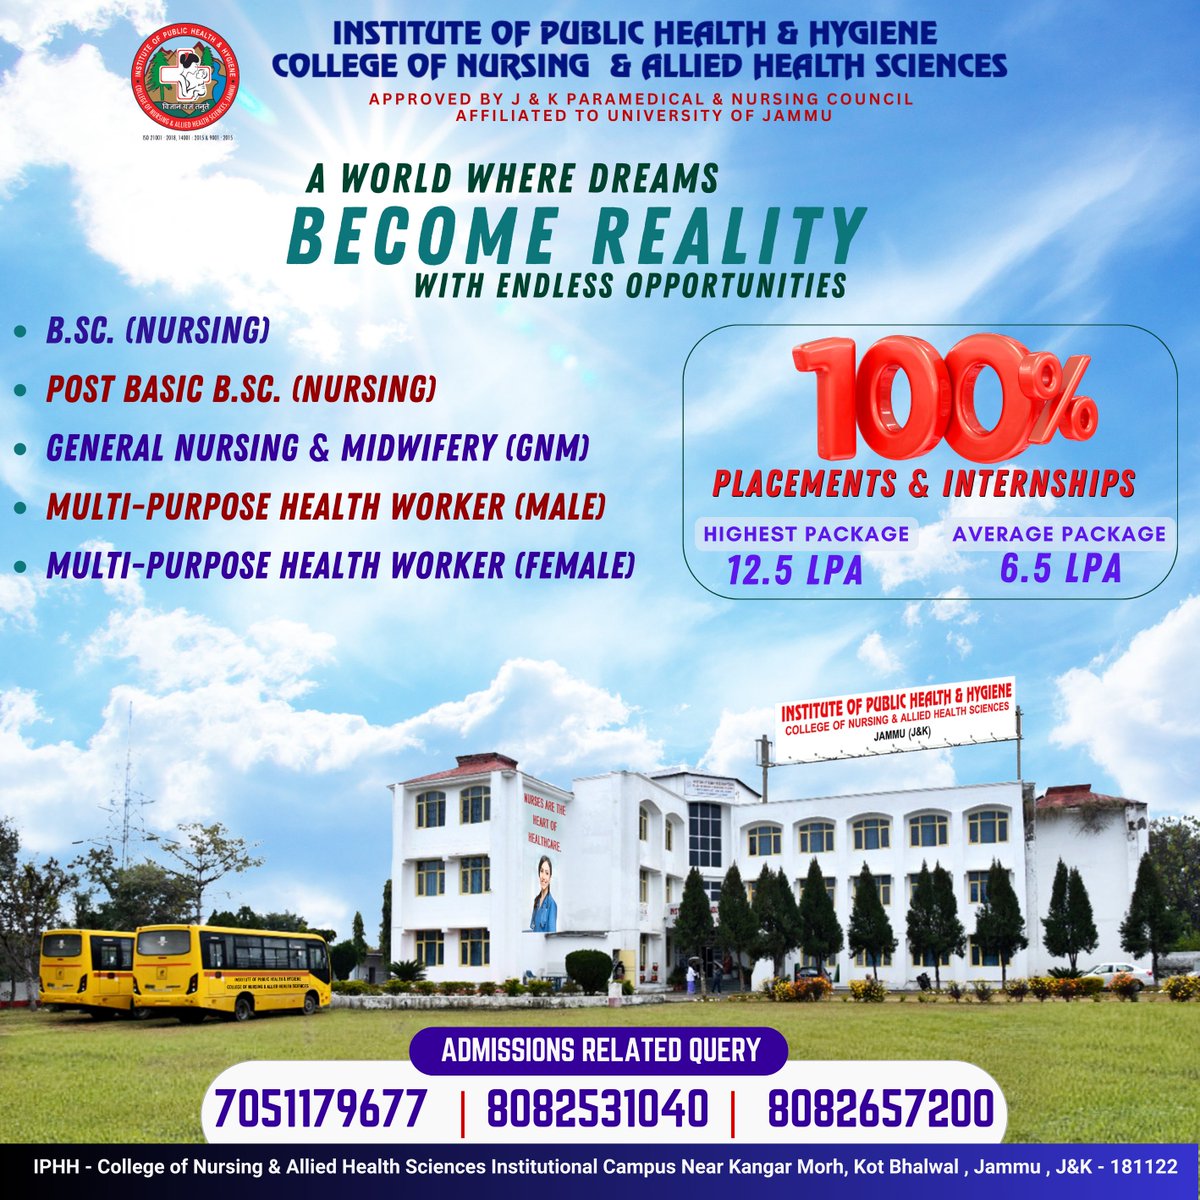 JOIN IPHH COLLEGE OF NURSING AND ALLIED HEALTH SCIENCES! TURN YOUR DREAMS INTO REALITY WITH ENDLESS OPPORTUNITIES! ENJOY 100% PLACEMENT AND PRACTICAL INTERNSHIP EXPOSURE. Visit us at iphhnursingcollegejammu.org
#wednesdayvibes #healthcareworkers  #healthbenefits